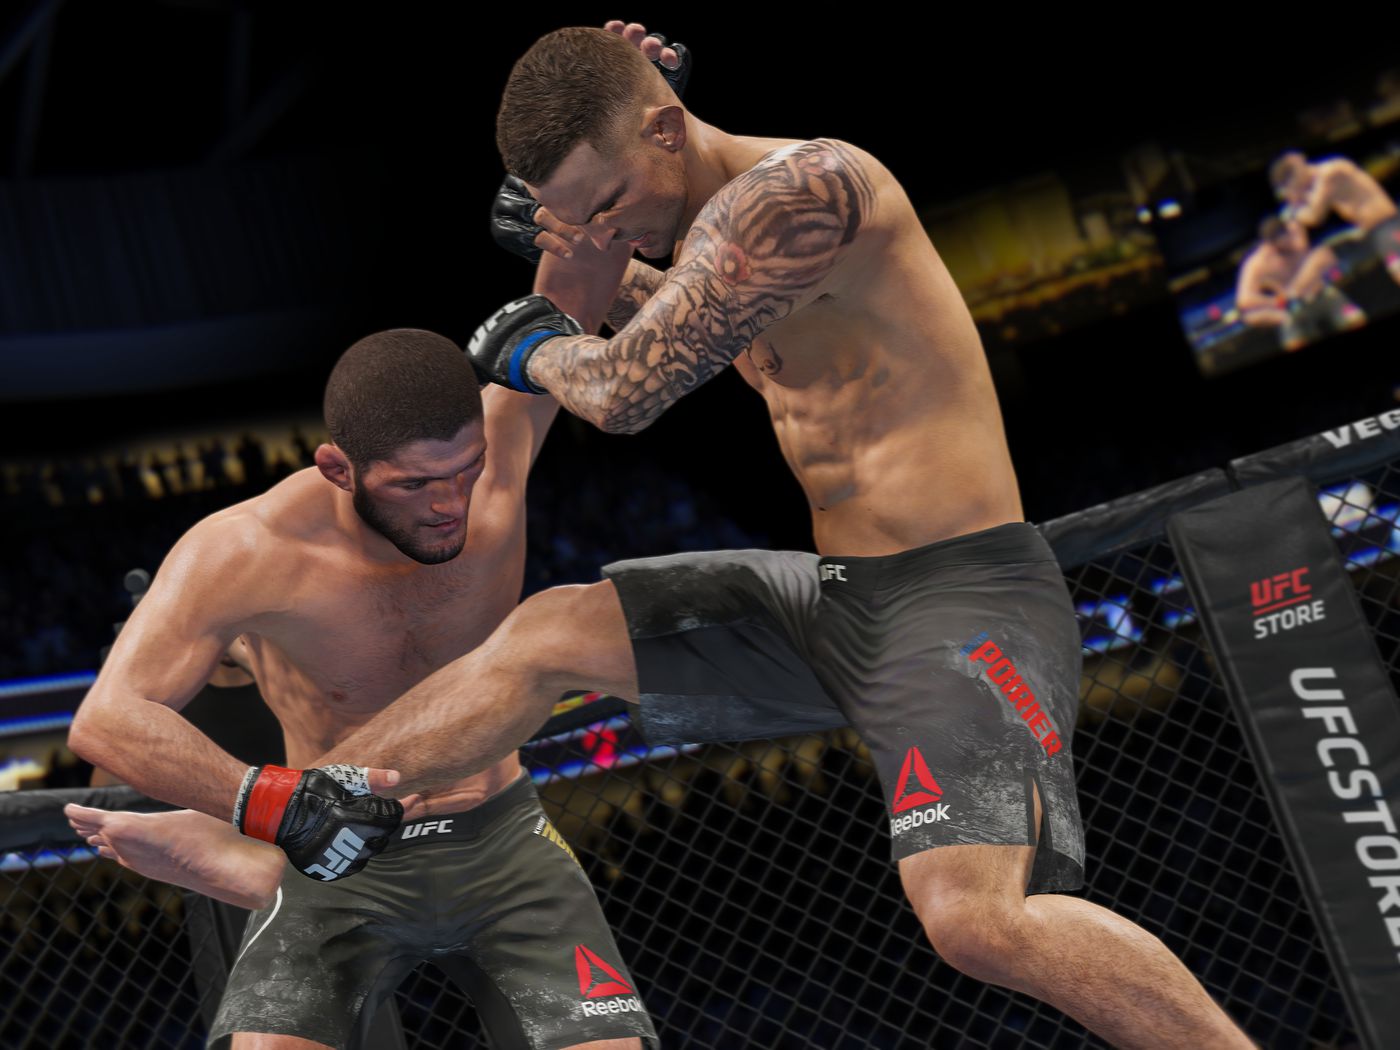 Sports UFC 4 delivers simpler controls, but asks a lot fighters -